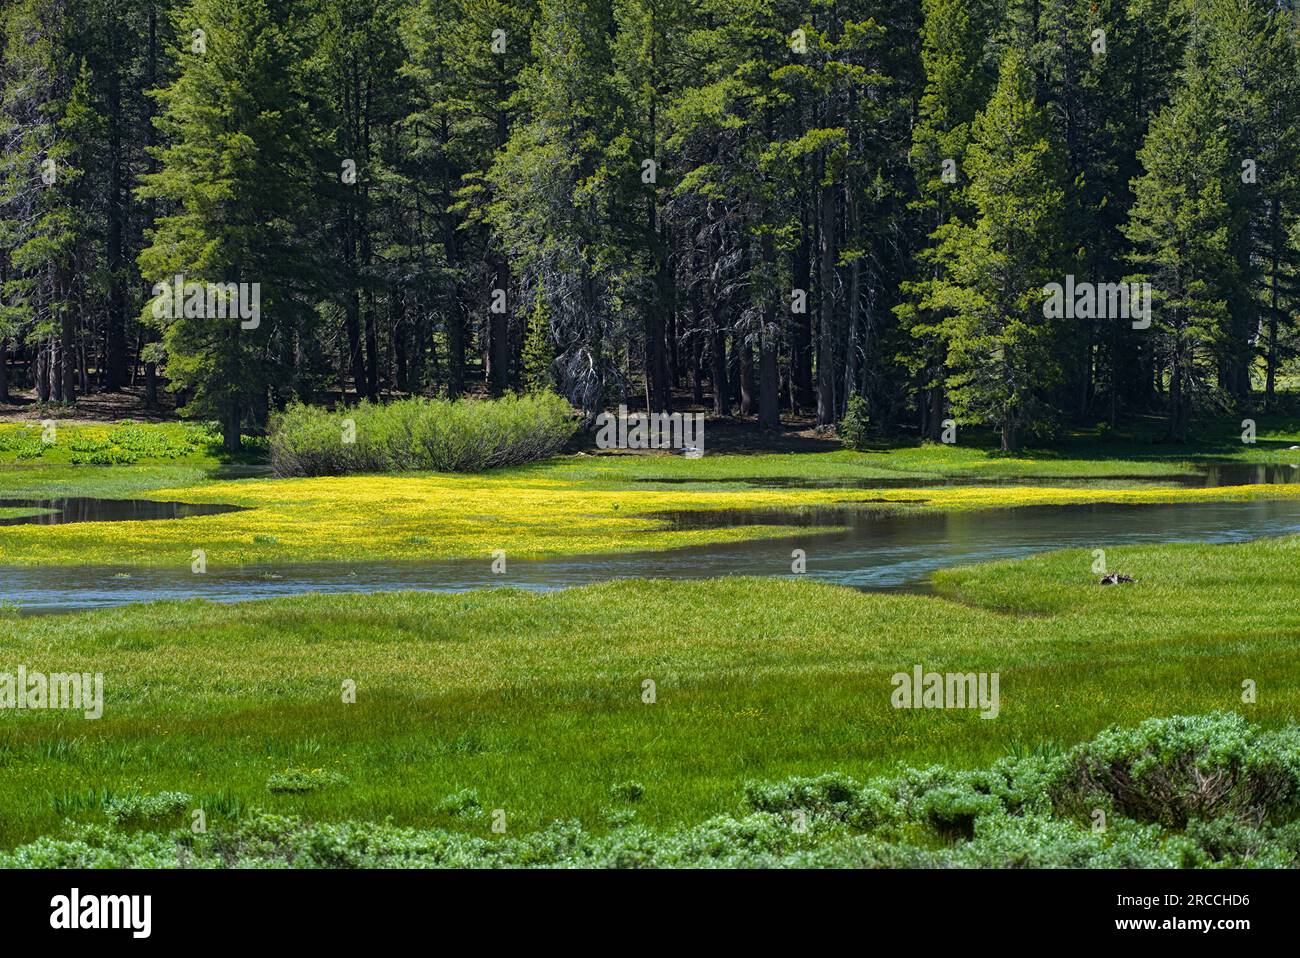 Meadow with yellow flowers in the middle and pine trees in the background. Stock Photo